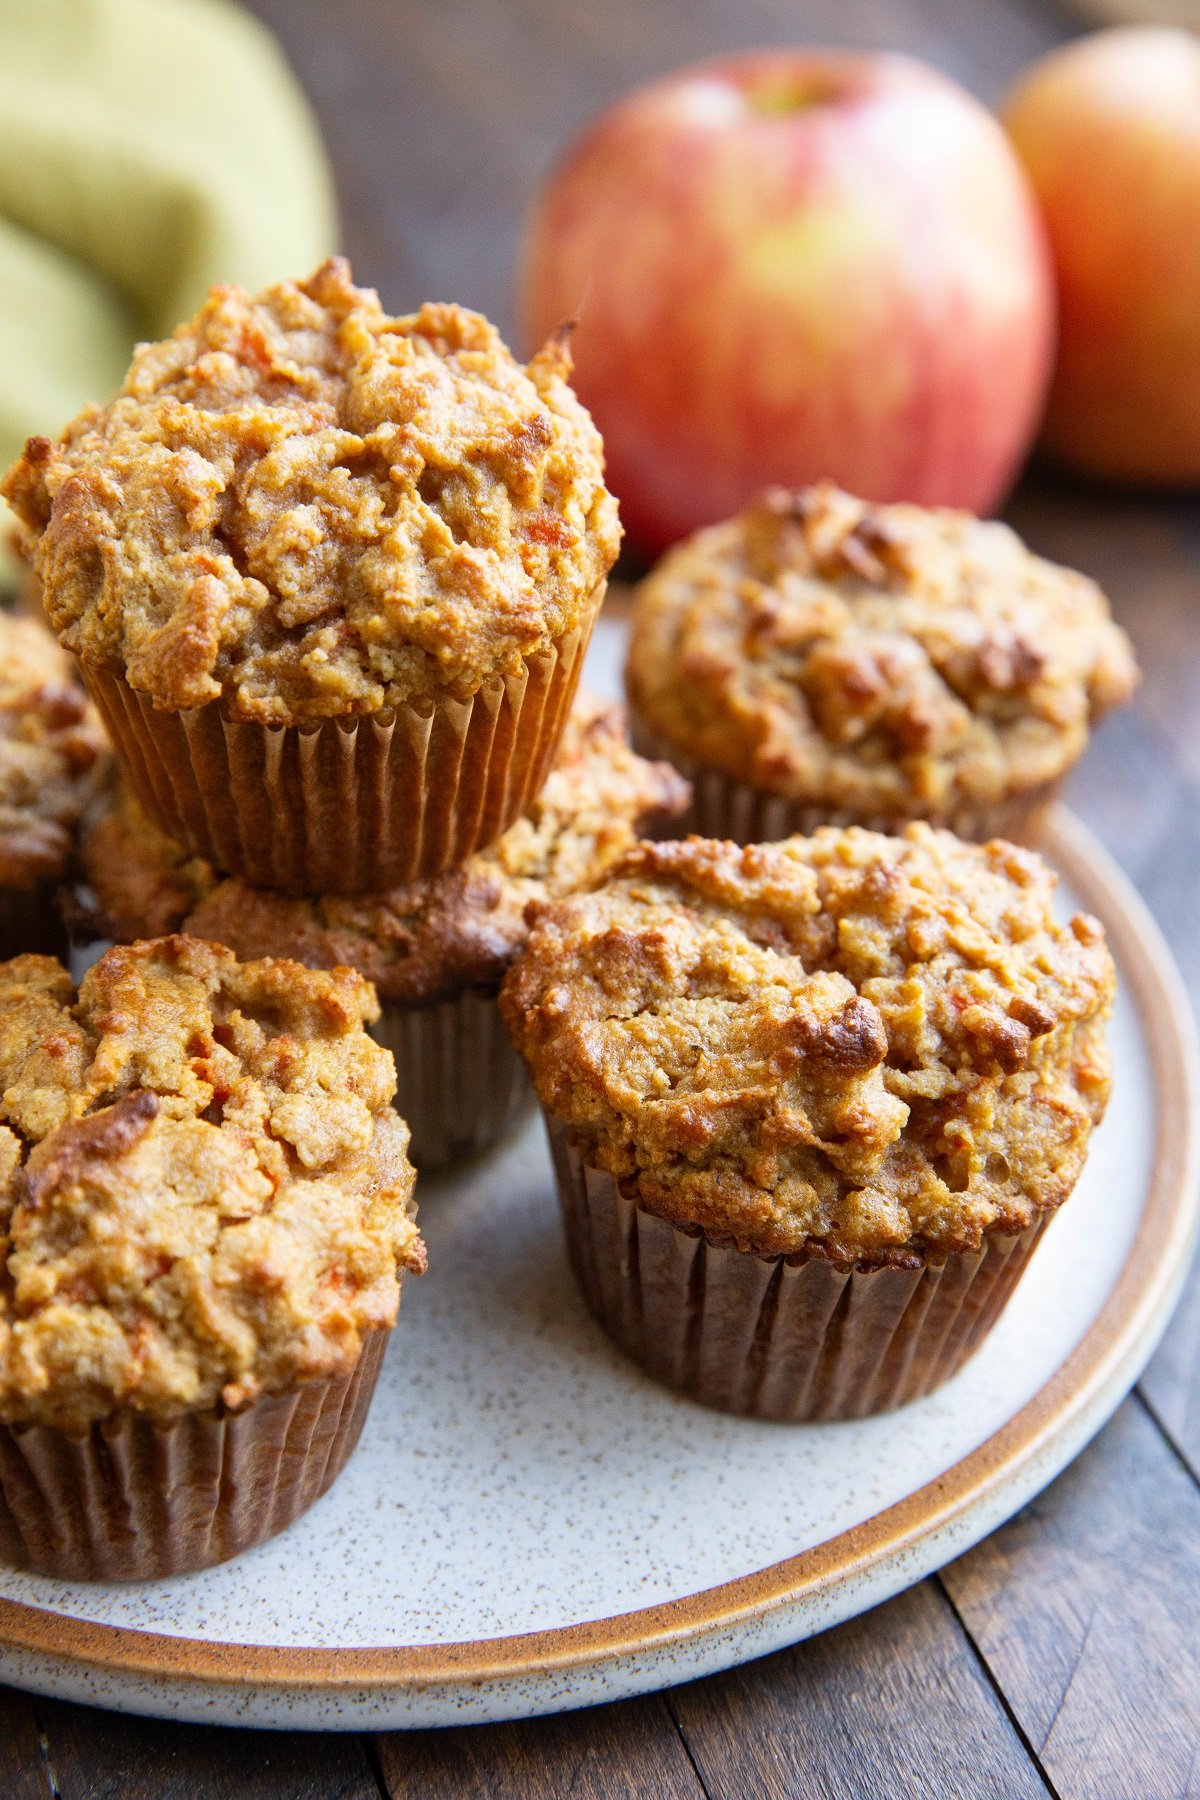 Plate of spiced apple carrot muffins with fresh apples in the background, ready to eat.